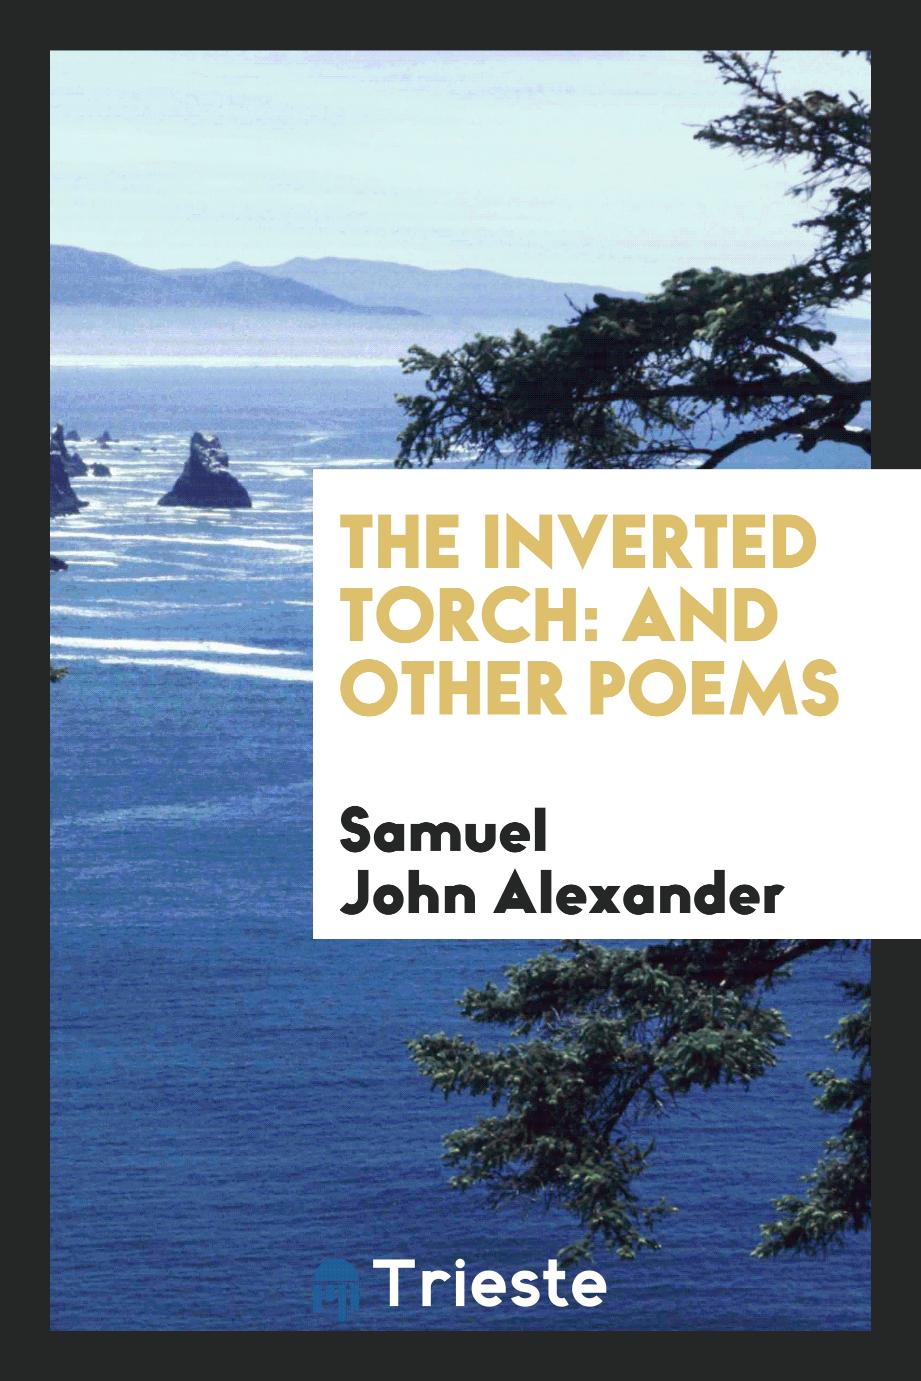 The inverted torch: and other poems